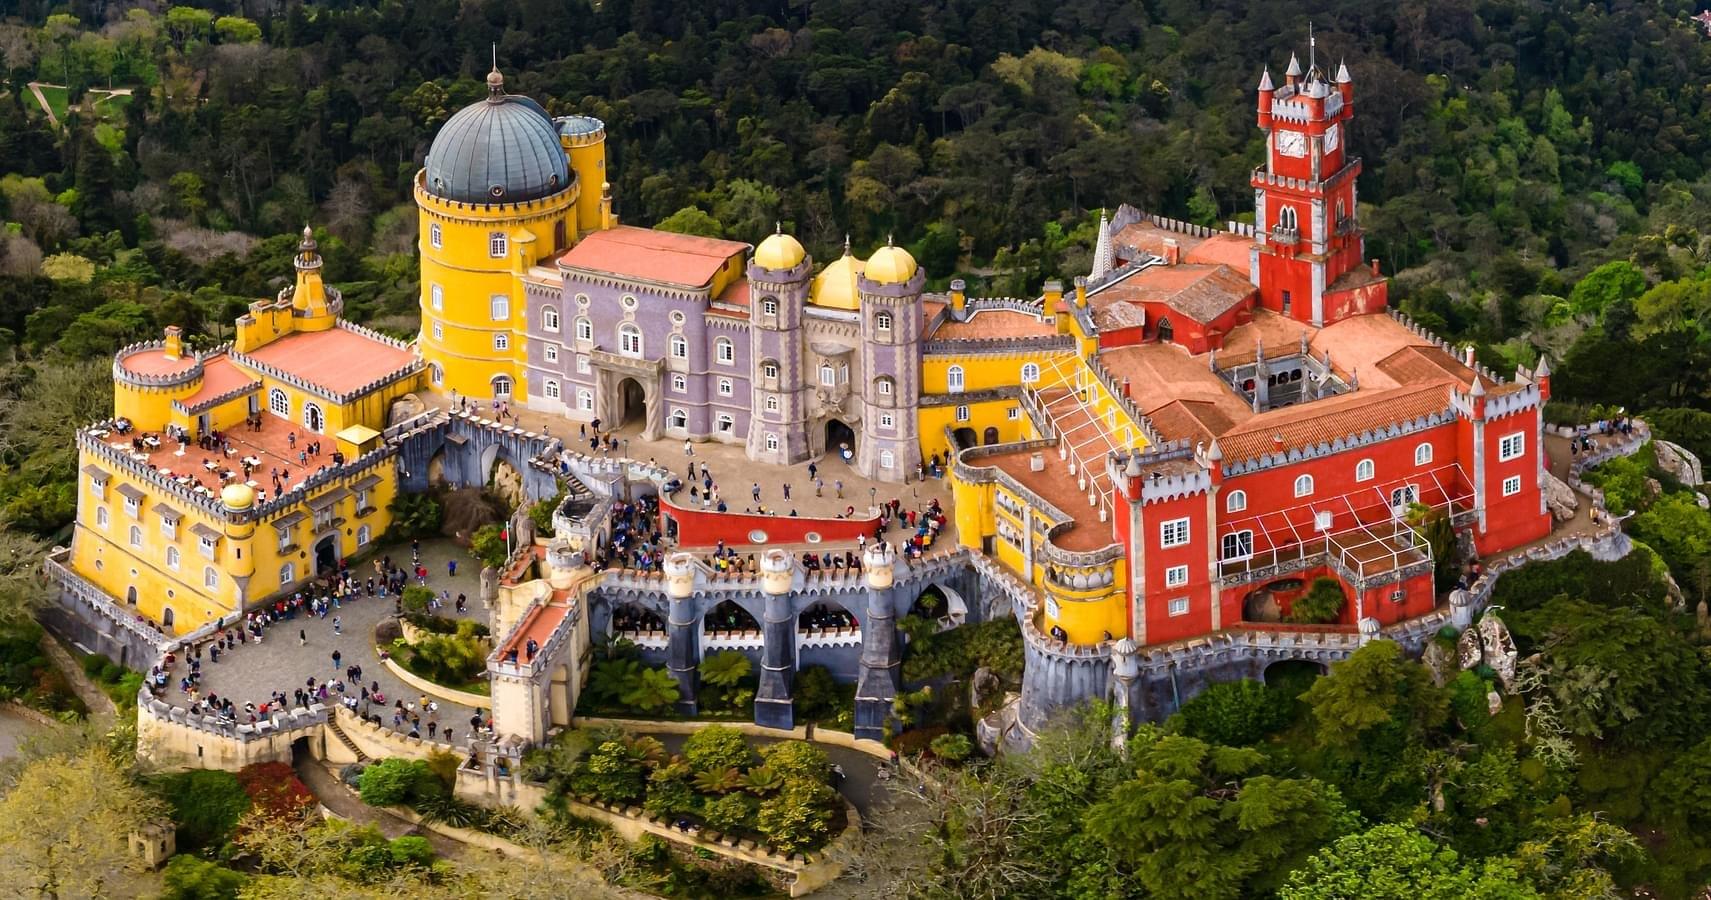 State Ownership of Pena Palace